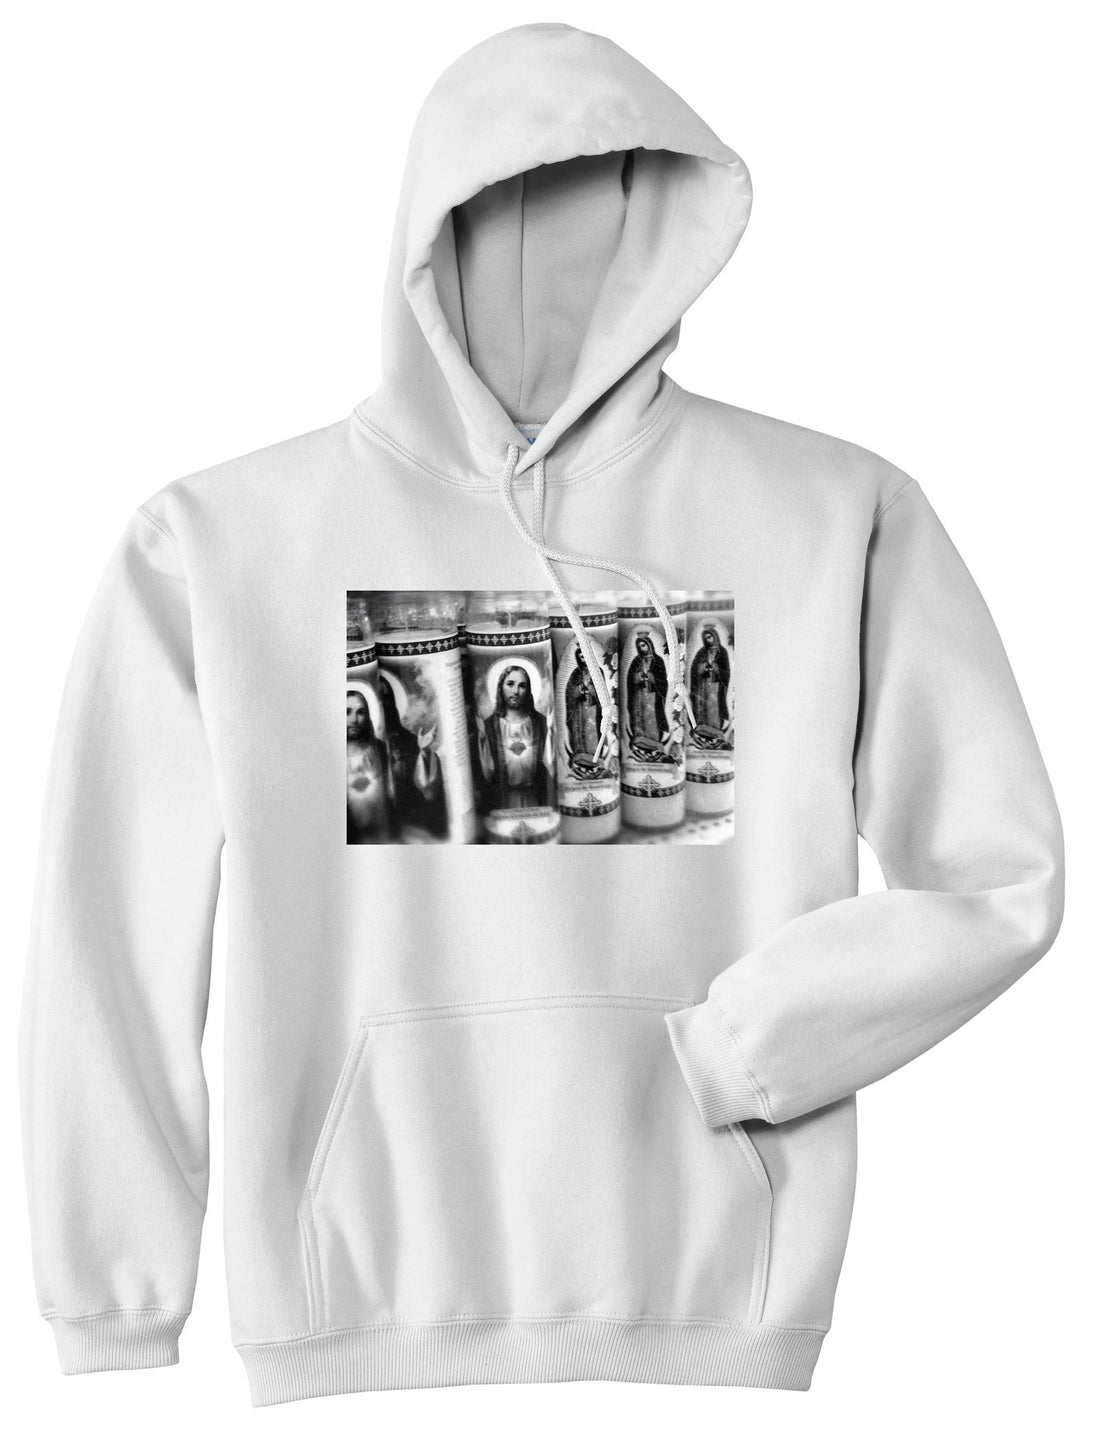 Candles Religious God Jesus Mary Fire NYC Boys Kids Pullover Hoodie Hoody in White by Kings Of NY